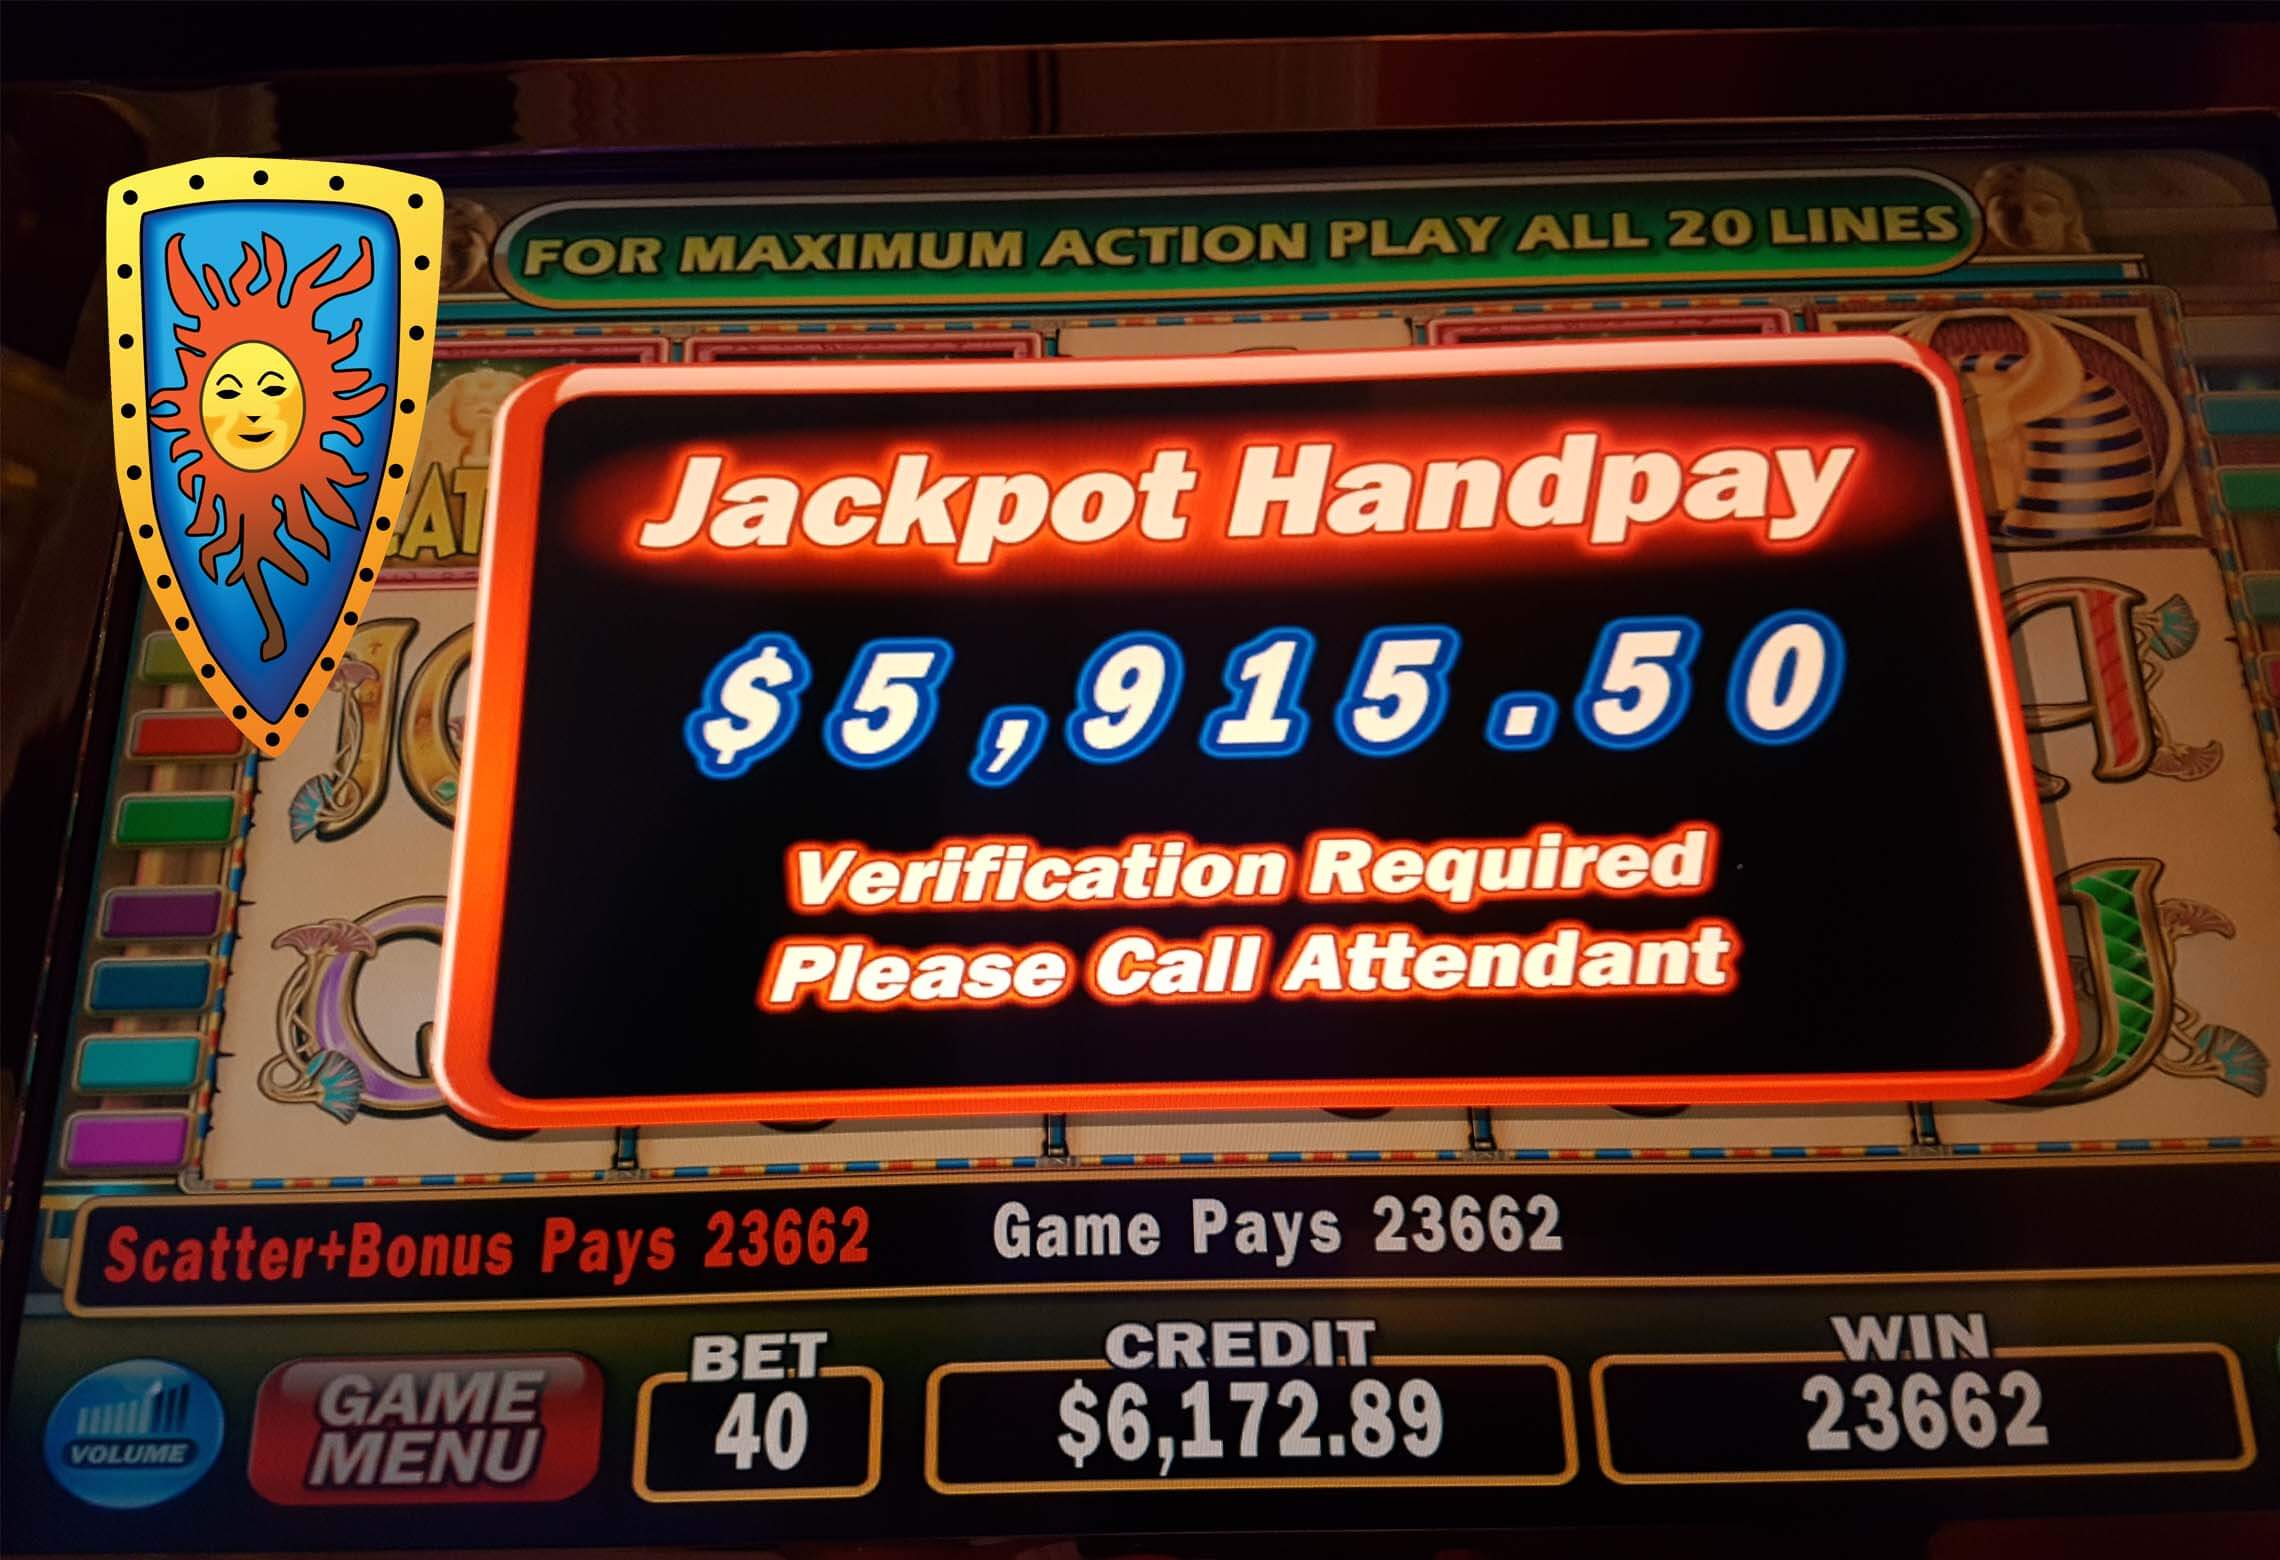 Are Online Casino Jackpots Paid in Full or Installments?